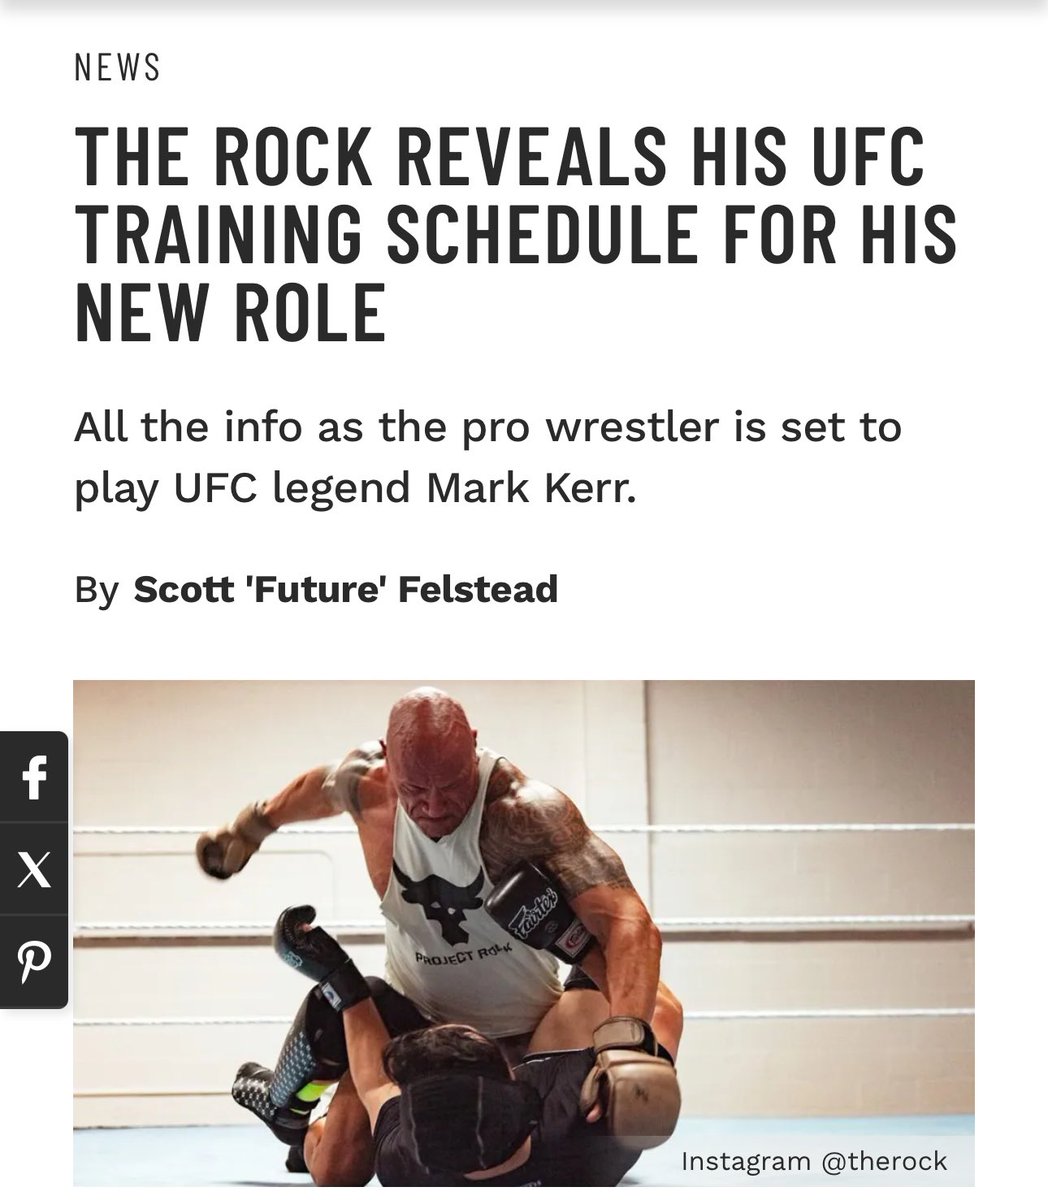 THE ROCK REVEALS HIS UFC TRAINING SCHEDULE FOR HIS NEW ROLE

All the info as the pro wrestler is set to play UFC legend Mark Kerr.
By Scott 'Future' Felstead

Read Article: muscleandfitness.com

#celebritynews #entertainmentnews #fitnessnews #mmanews #socialmedianews